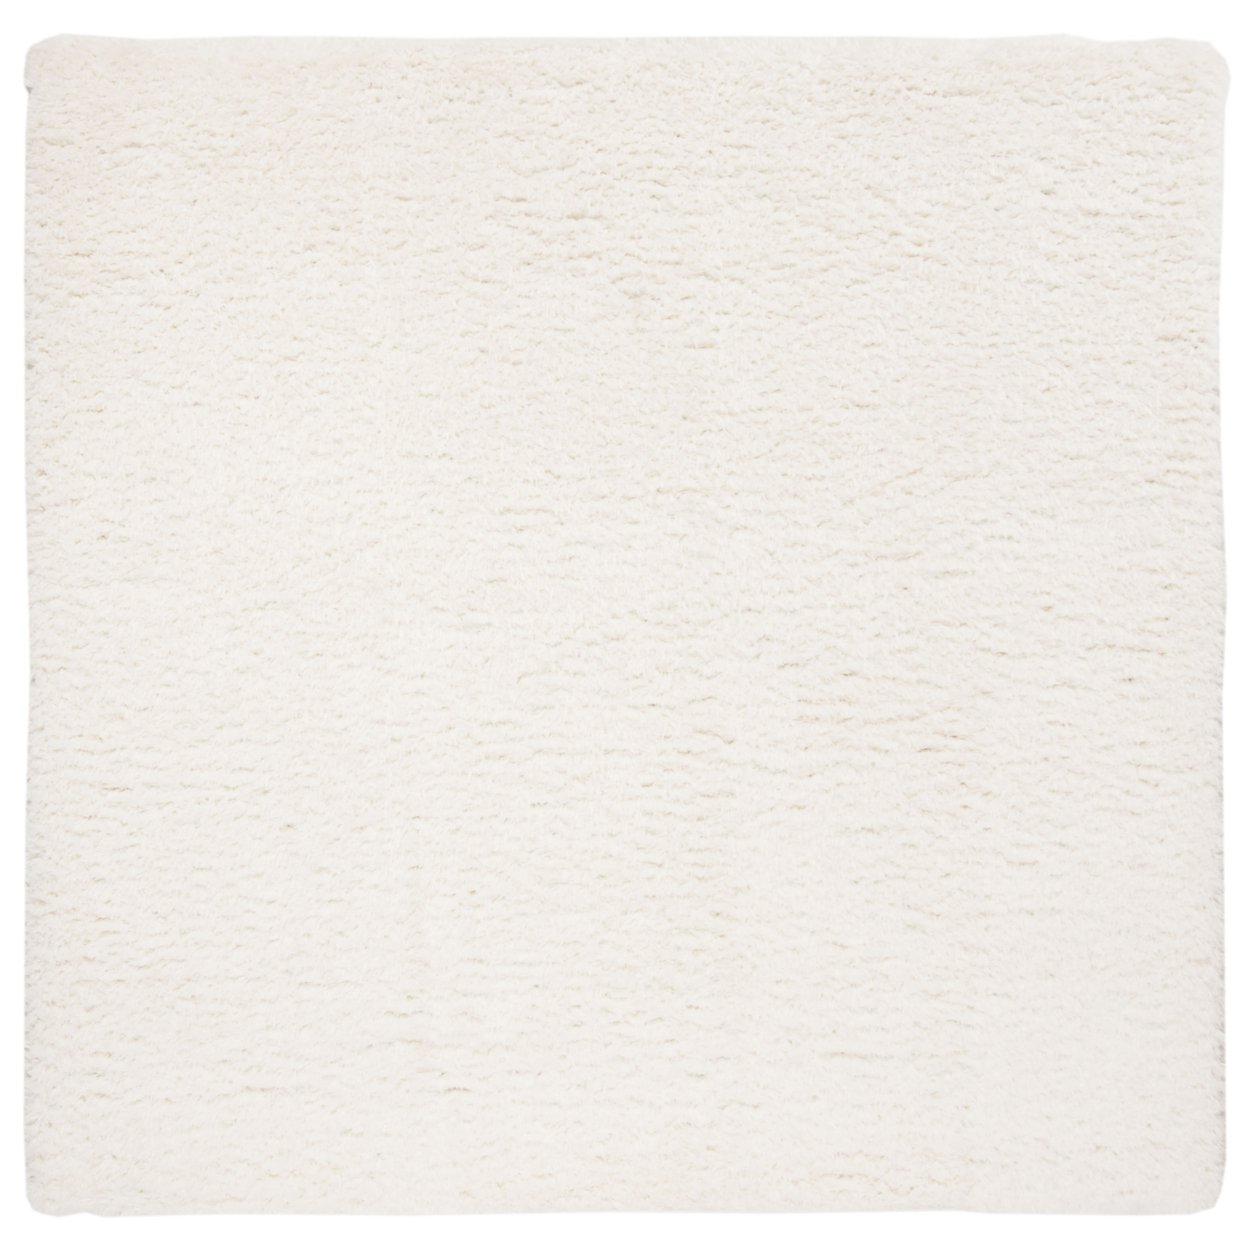 SAFAVIEH Madrid Shag Collection MDG256A Ivory Rug - 3' Square